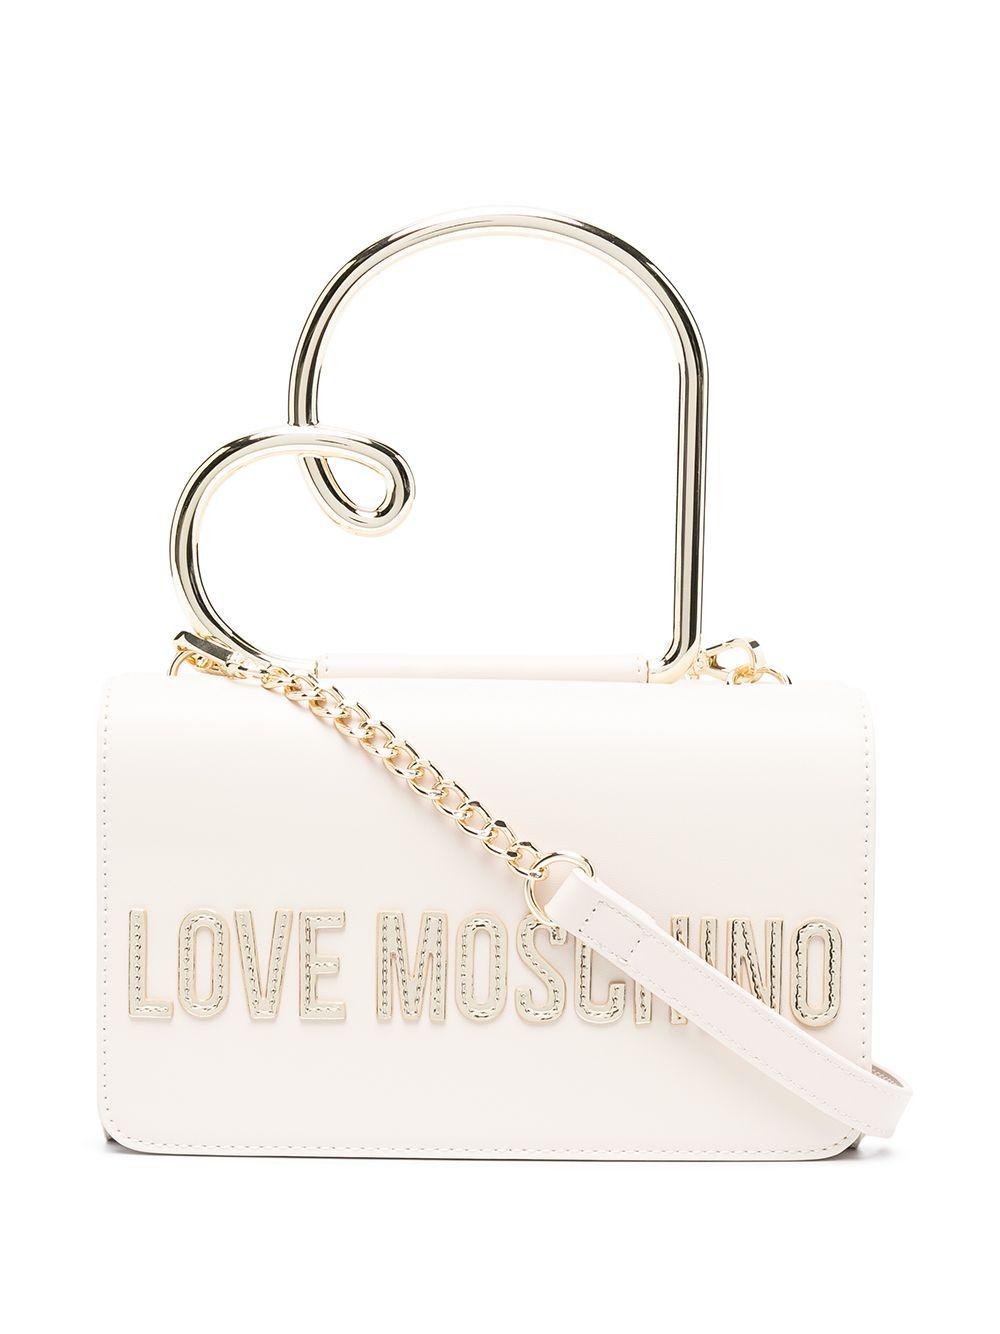 Love Moschino Womens Tote Laced Soft Heart Shopper Ladies Nude